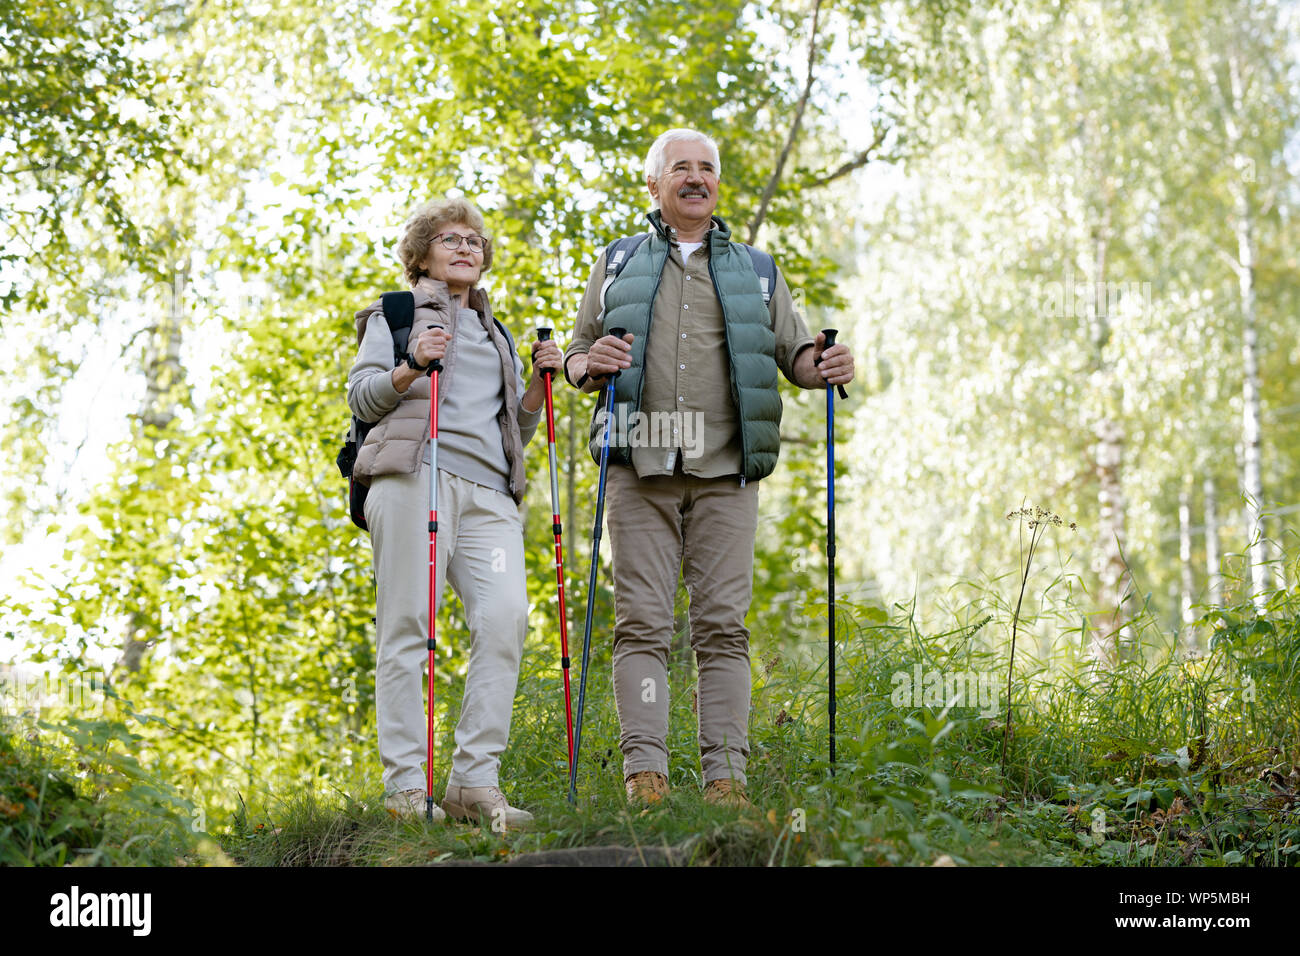 Mature active man and woman with trekking sticks standing among green trees Stock Photo